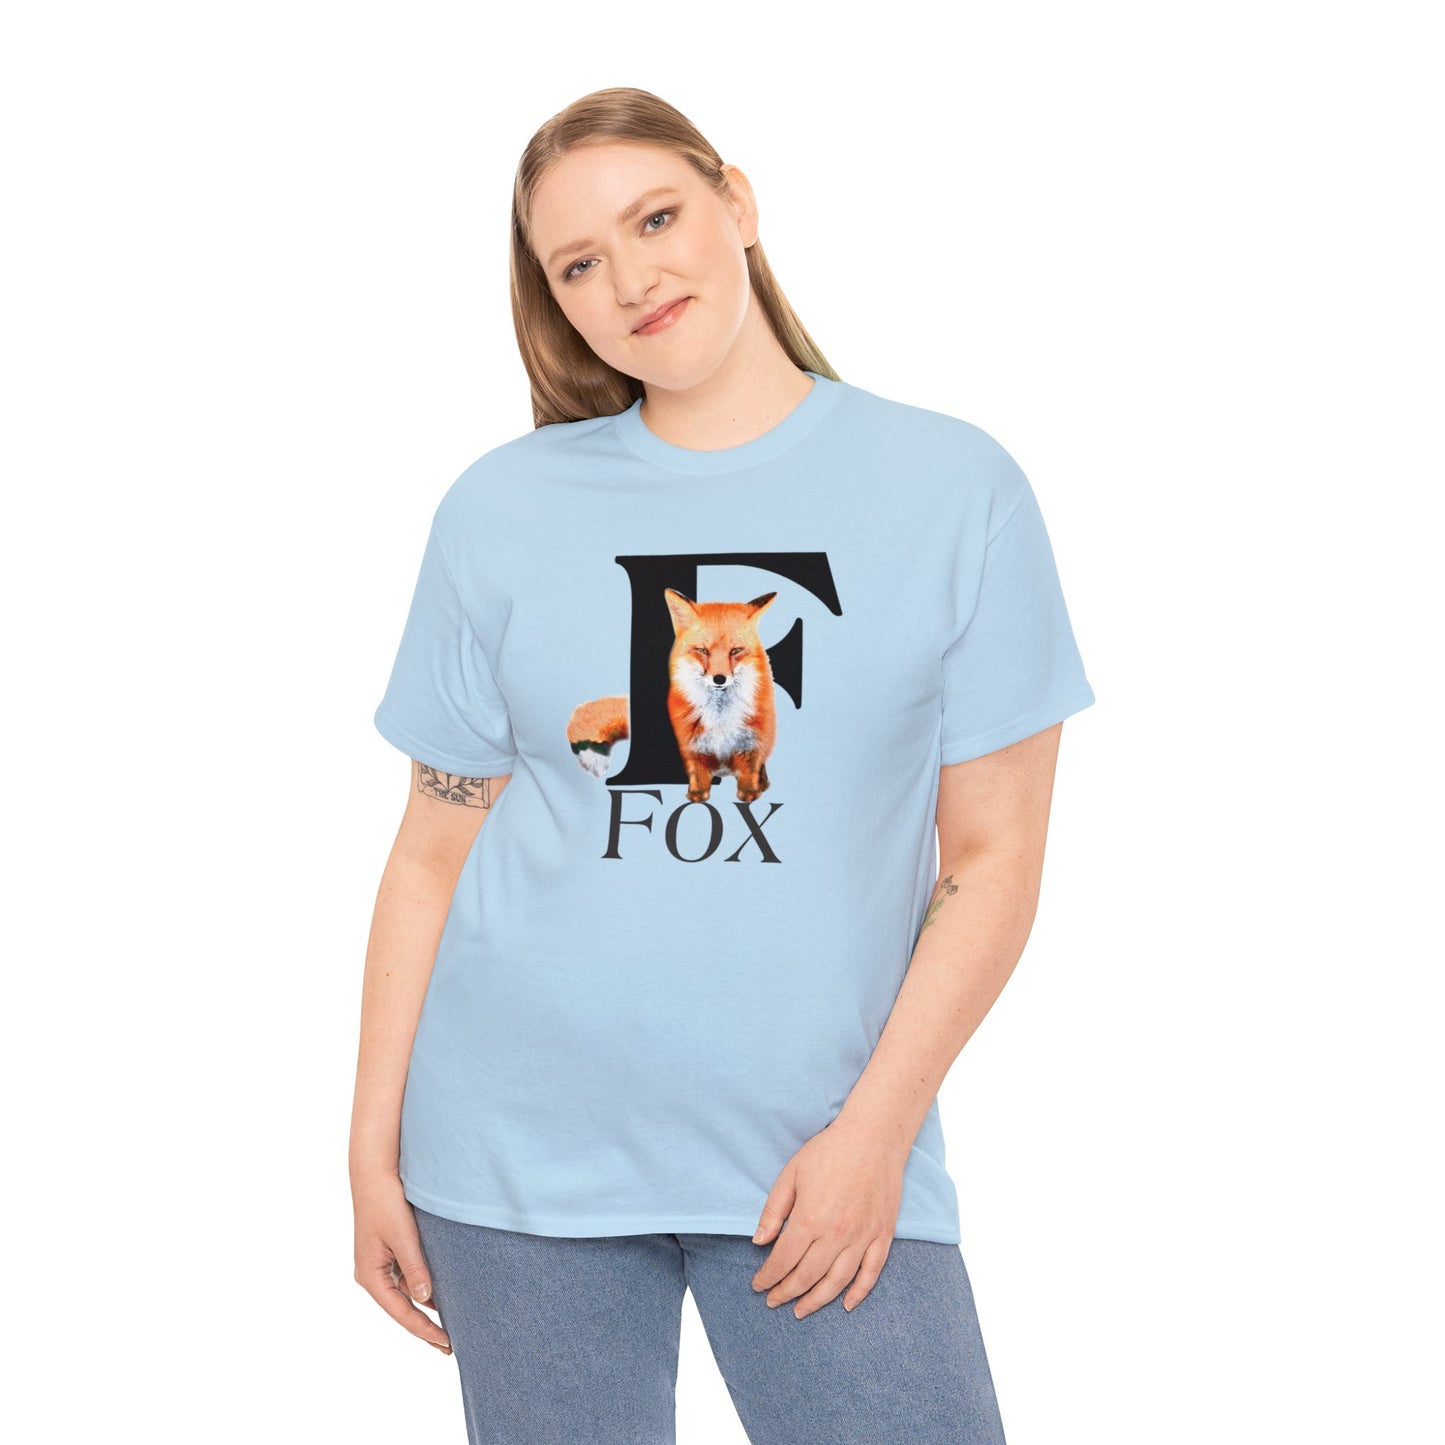 F is for Fox T-Shirt, Animal Letter F Tee, cute Fuzzy Fox Tee, Fox Drawing T-Shirt, animal t-shirt,